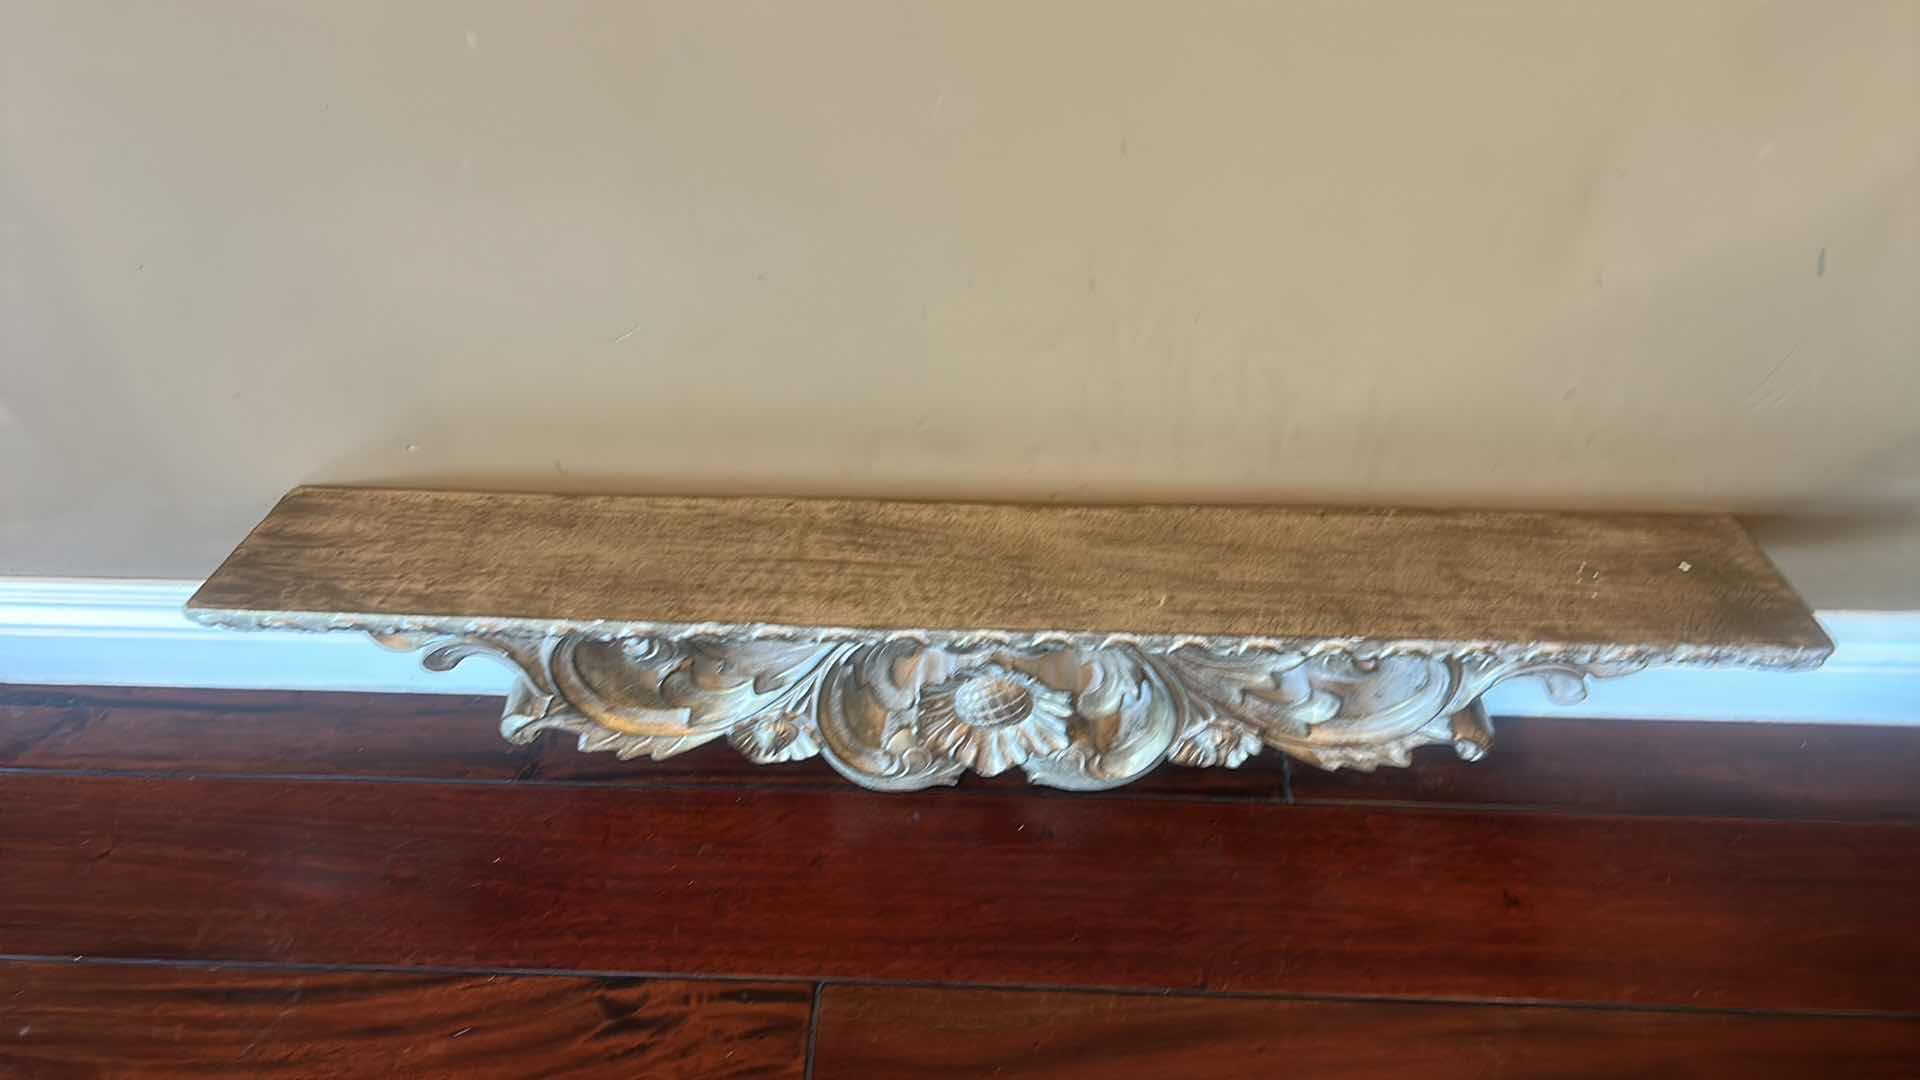 Photo 3 of HEAVY PLASTER WALL SHELF OR SHELF DECOR 3’ x 6” x 9” (WAS DISPLAYED UPSIDE DOWN ON TOP OF KITCHEN CABINETS)